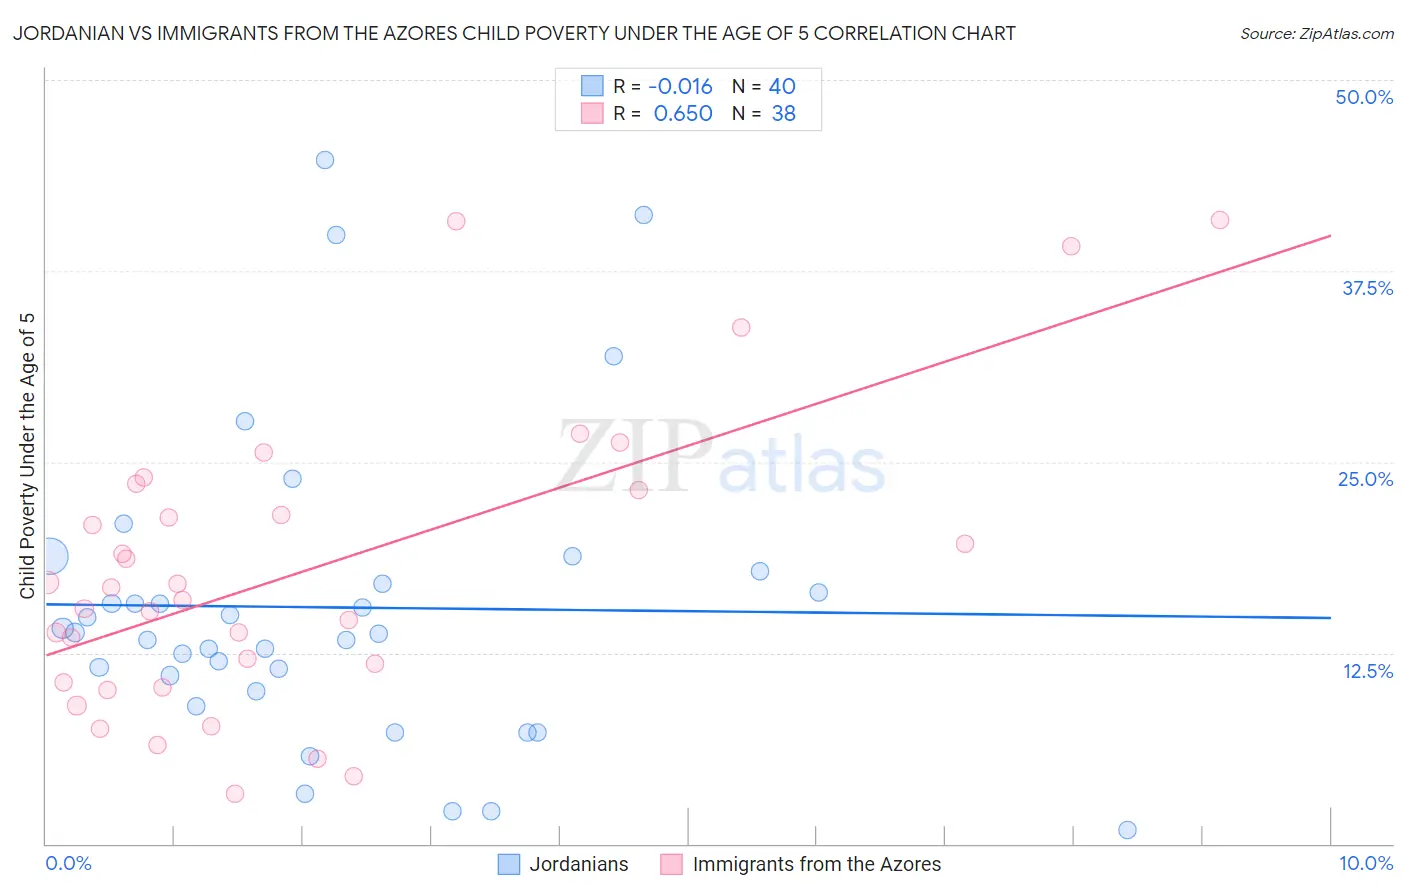 Jordanian vs Immigrants from the Azores Child Poverty Under the Age of 5